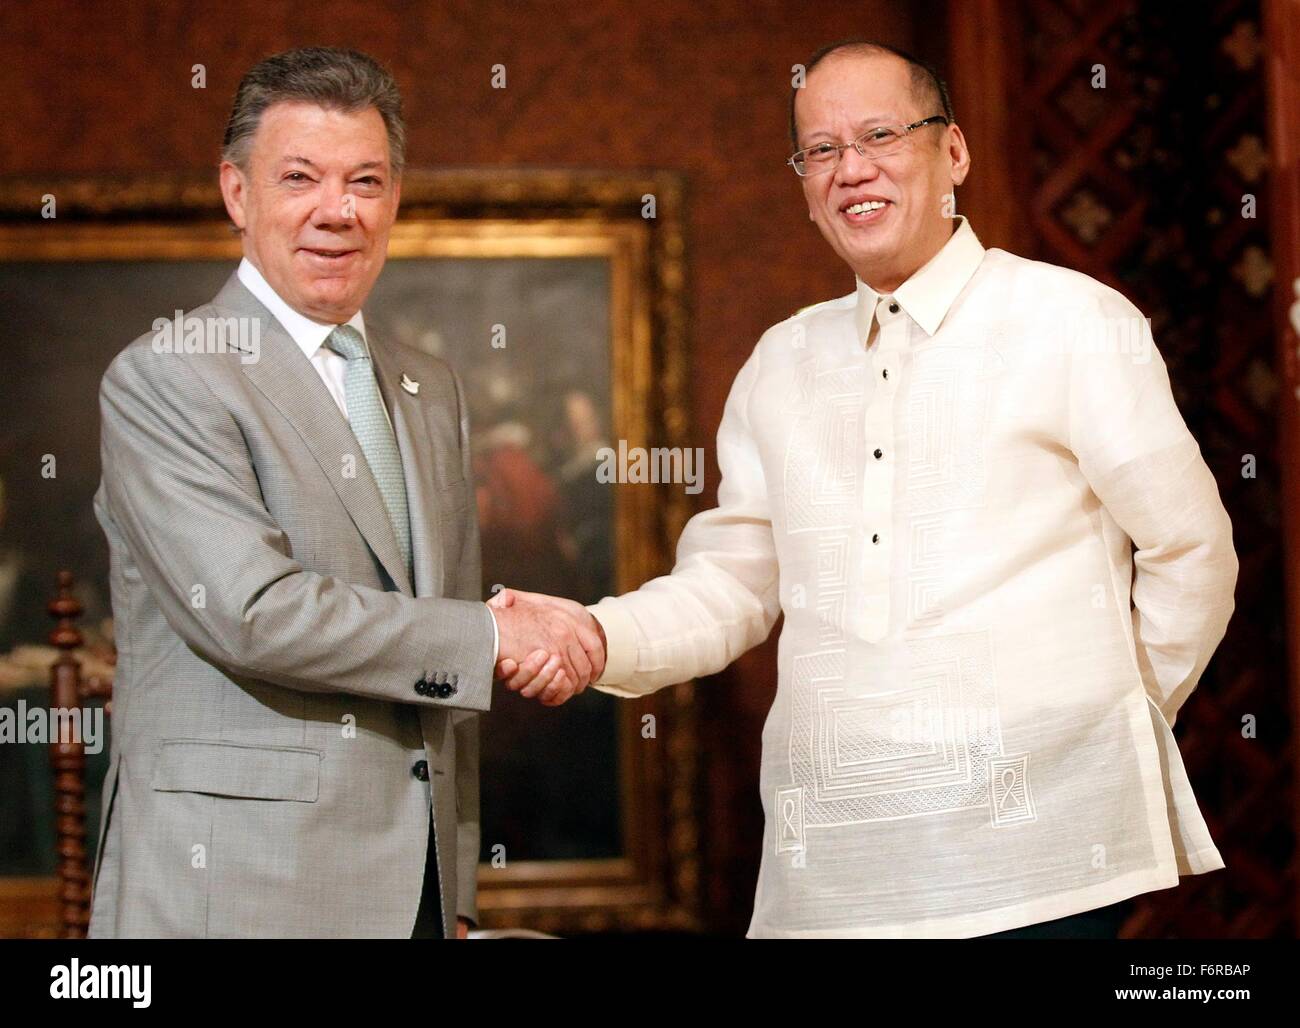 Philippine President Benigno Aquino III welcomes Colombia President Juan Manuel Santos, left, before their bilateral meeting on the sidelines of the APEC Leaders Summit at the Malacanang Palace November 17, 2015 in Manila, Philippines. Stock Photo